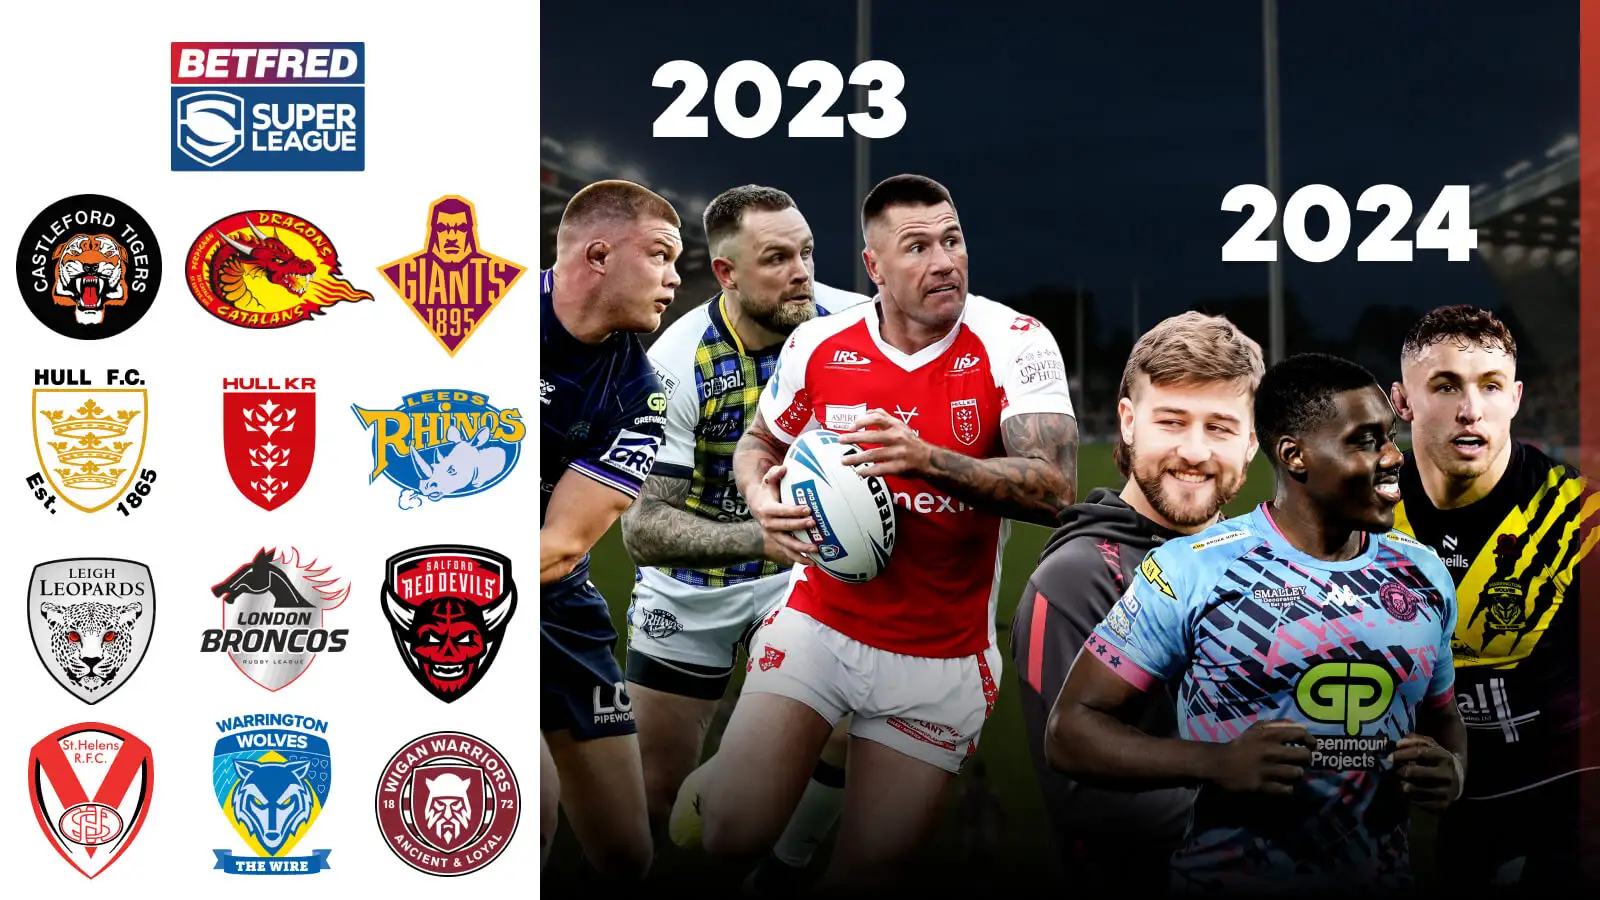 How different your Super League team will look in 2024 compared to 2023